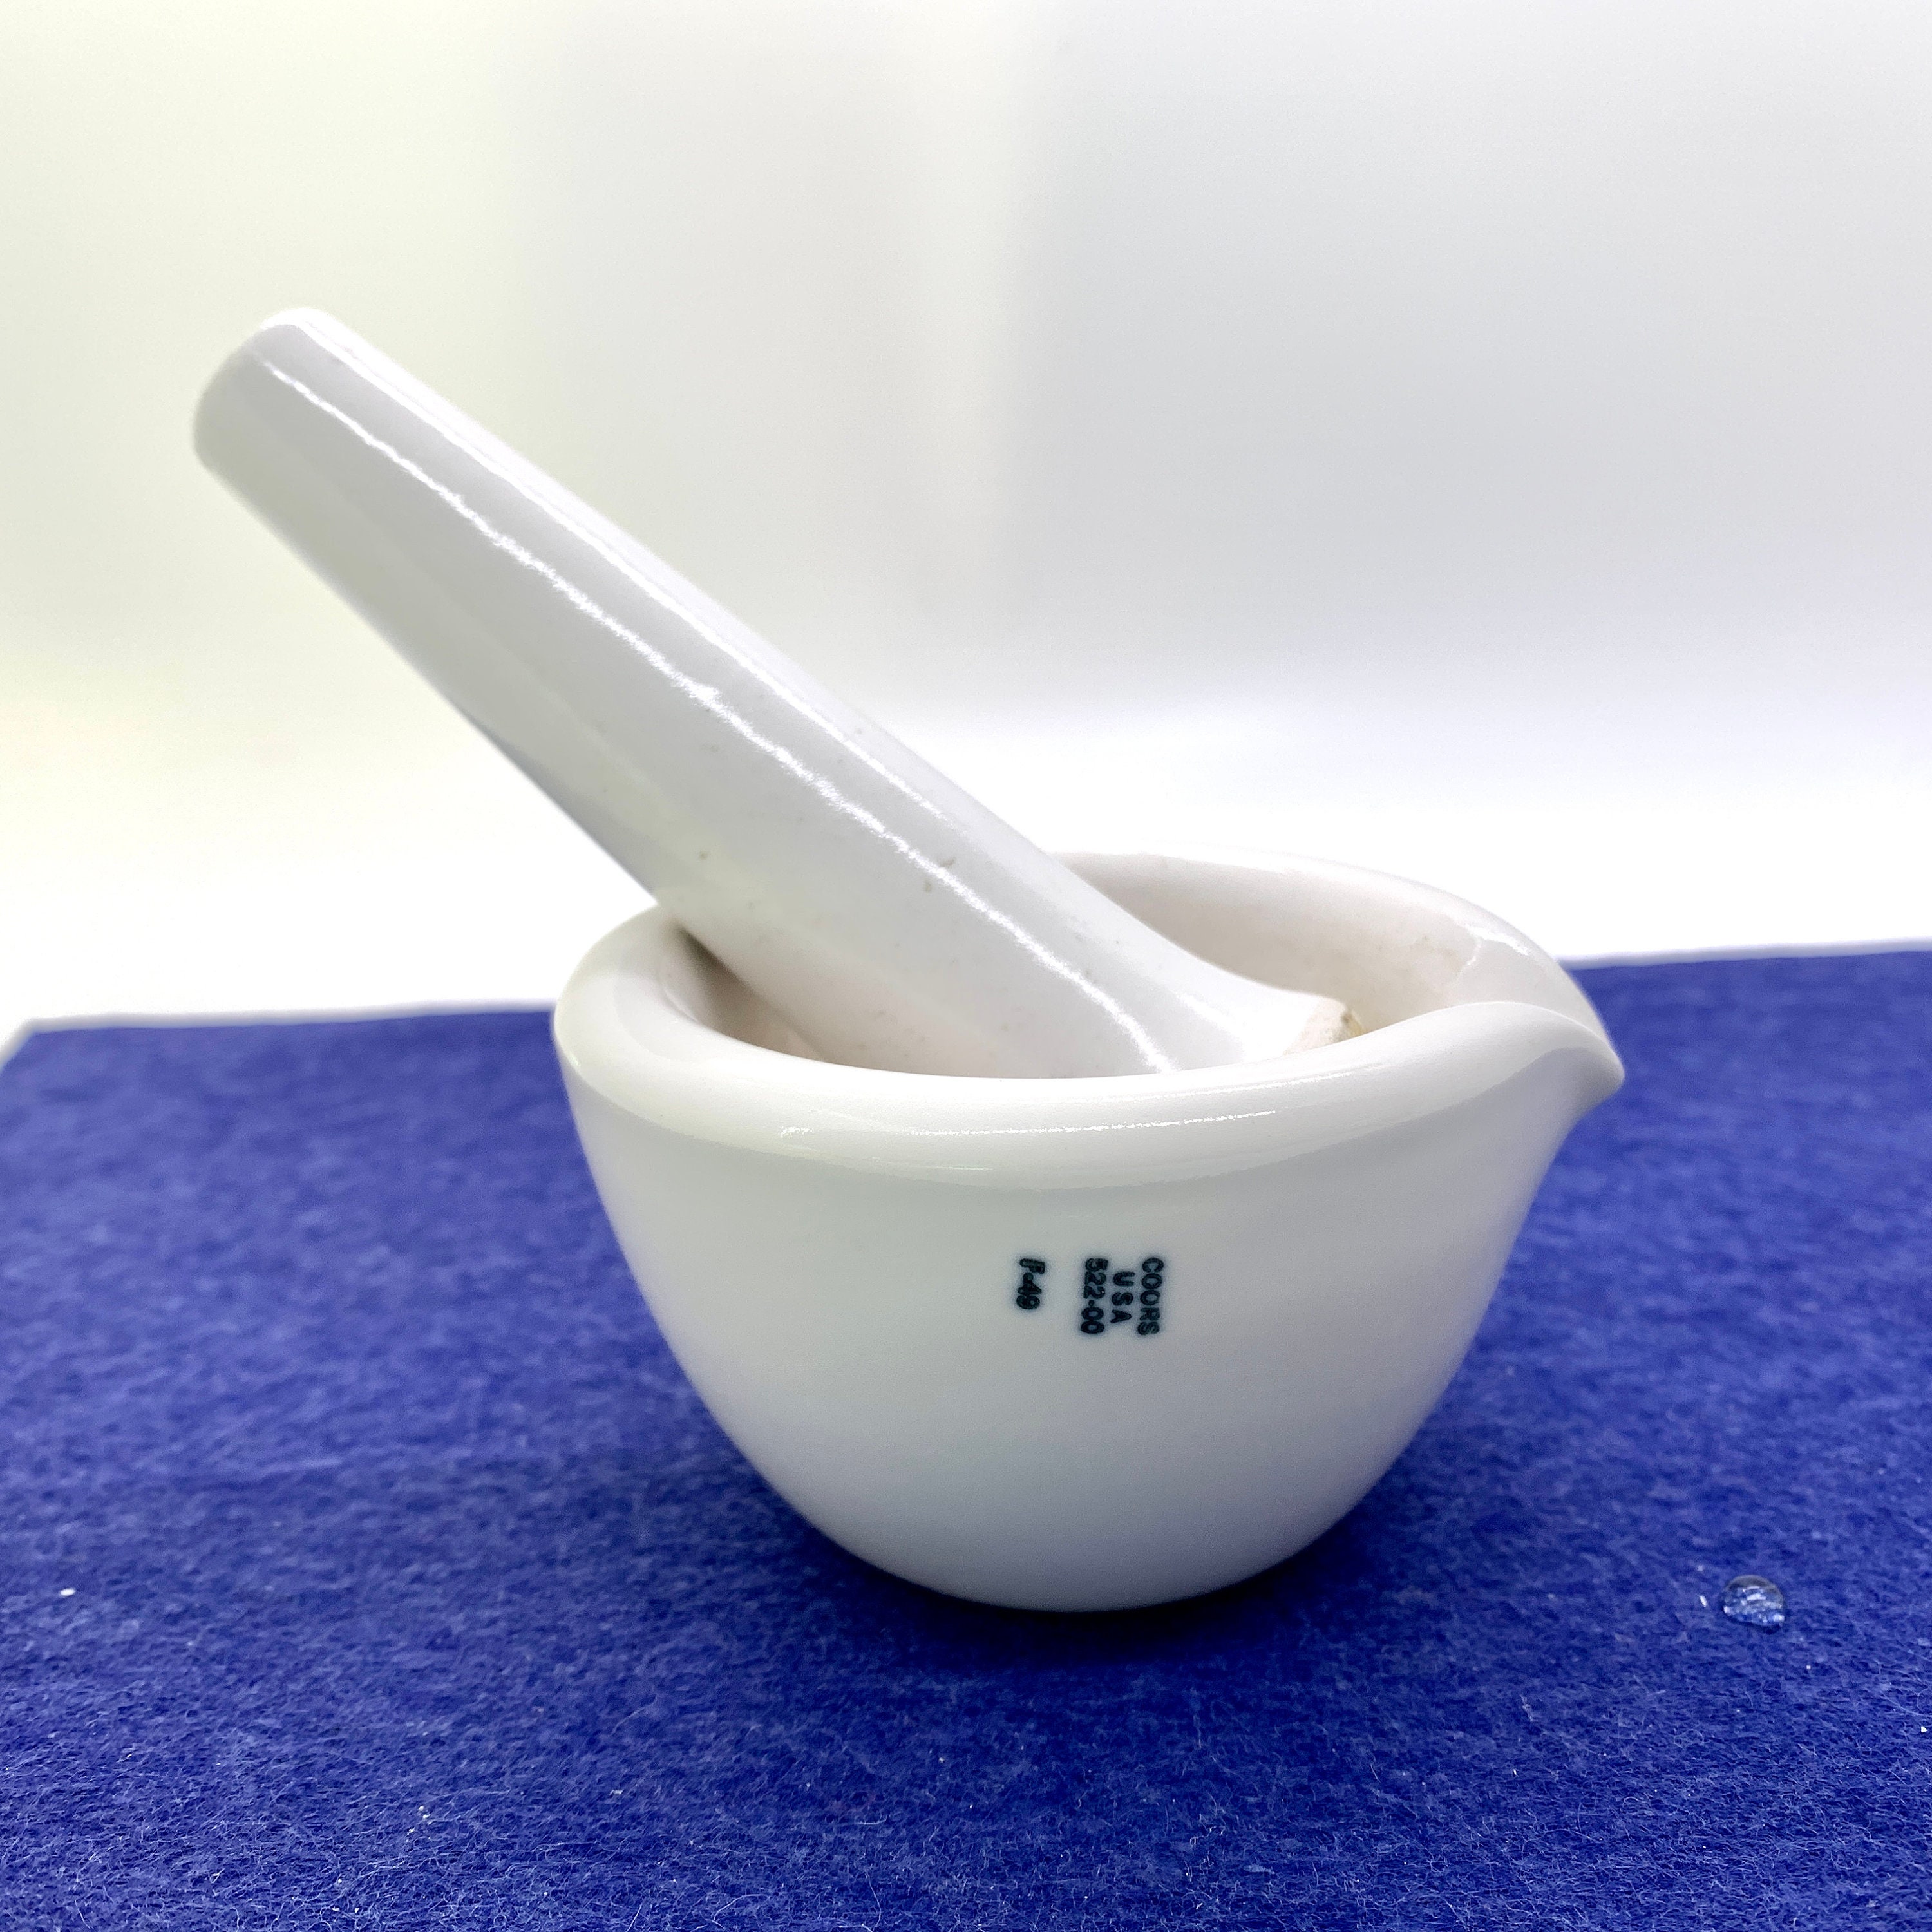 Mortar and Pestle Apothecary Coors Vintage Coors USA Pottery Small Size Morter and Pestle